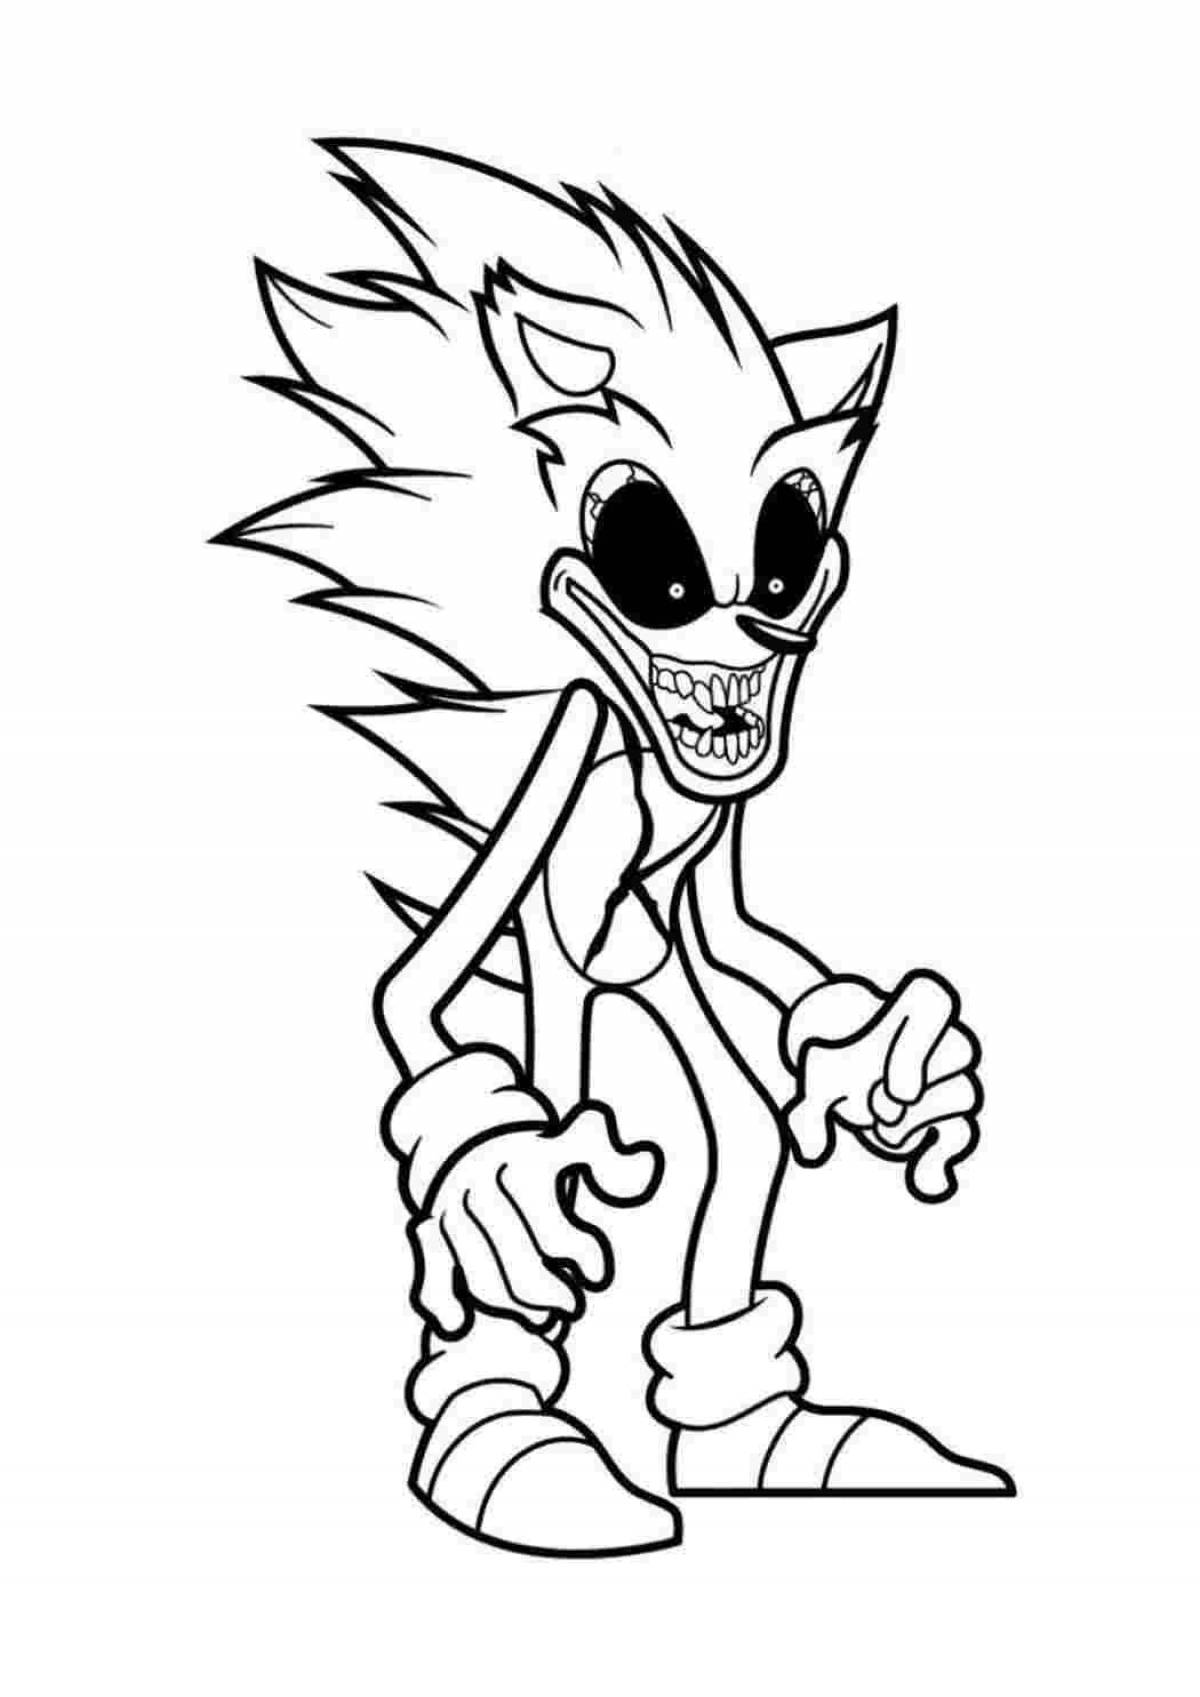 Super sonic exe vibrant coloring book